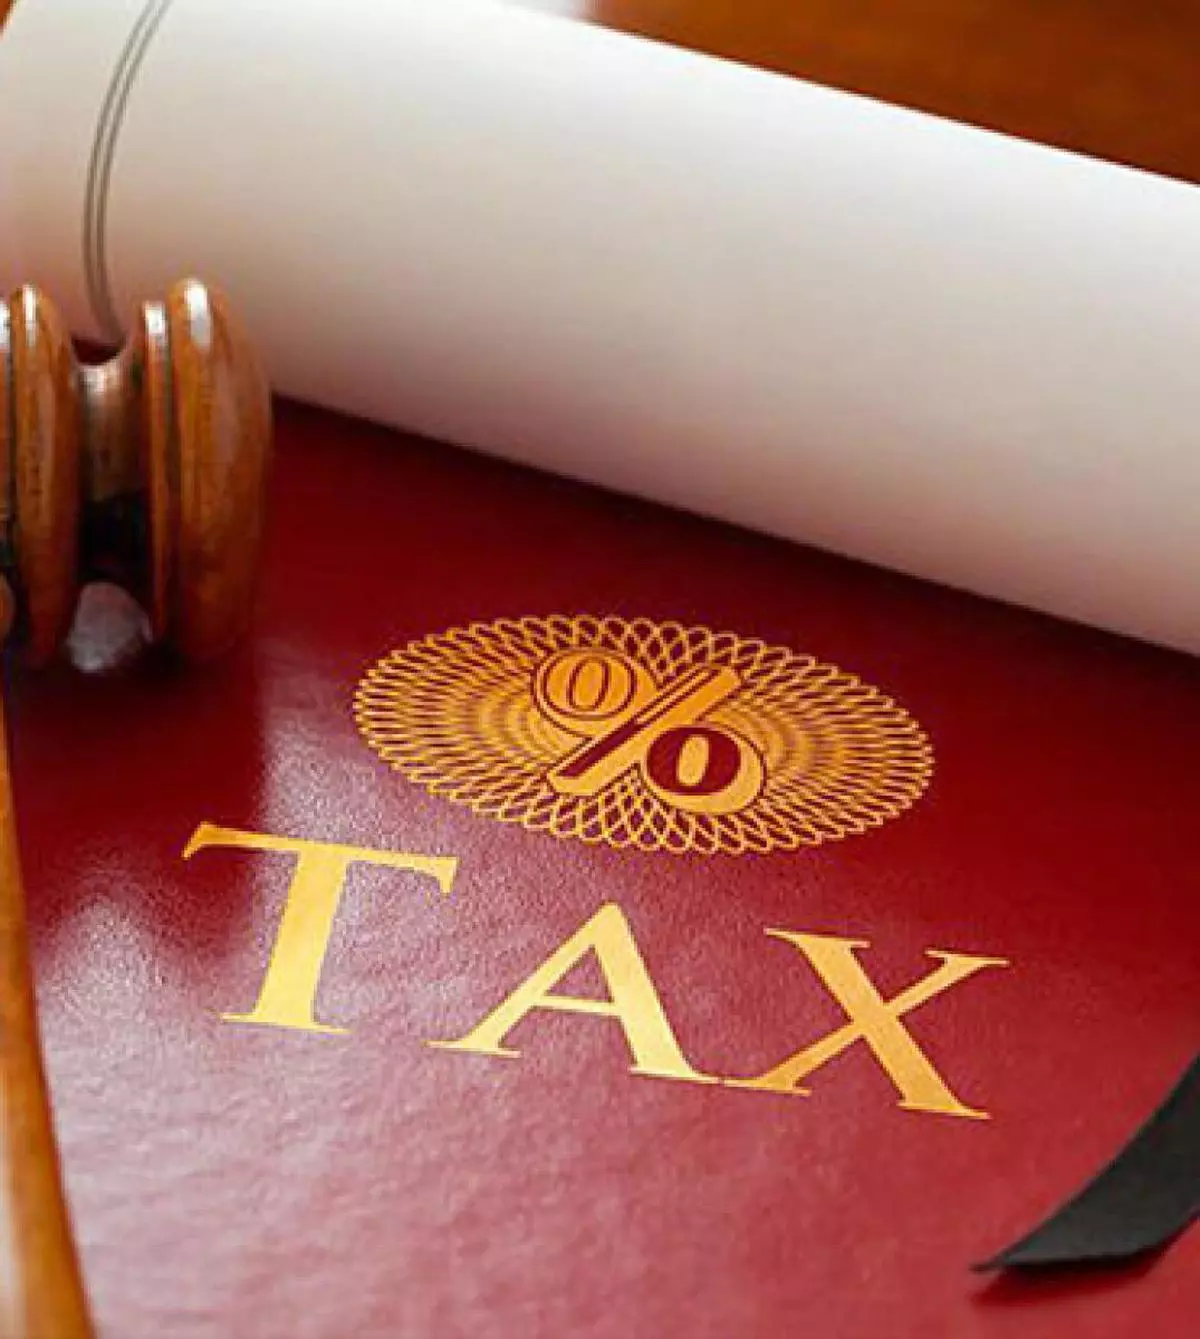 Form GSTR-3B shows summarised figures of sales, ITC claimed, and net tax payable